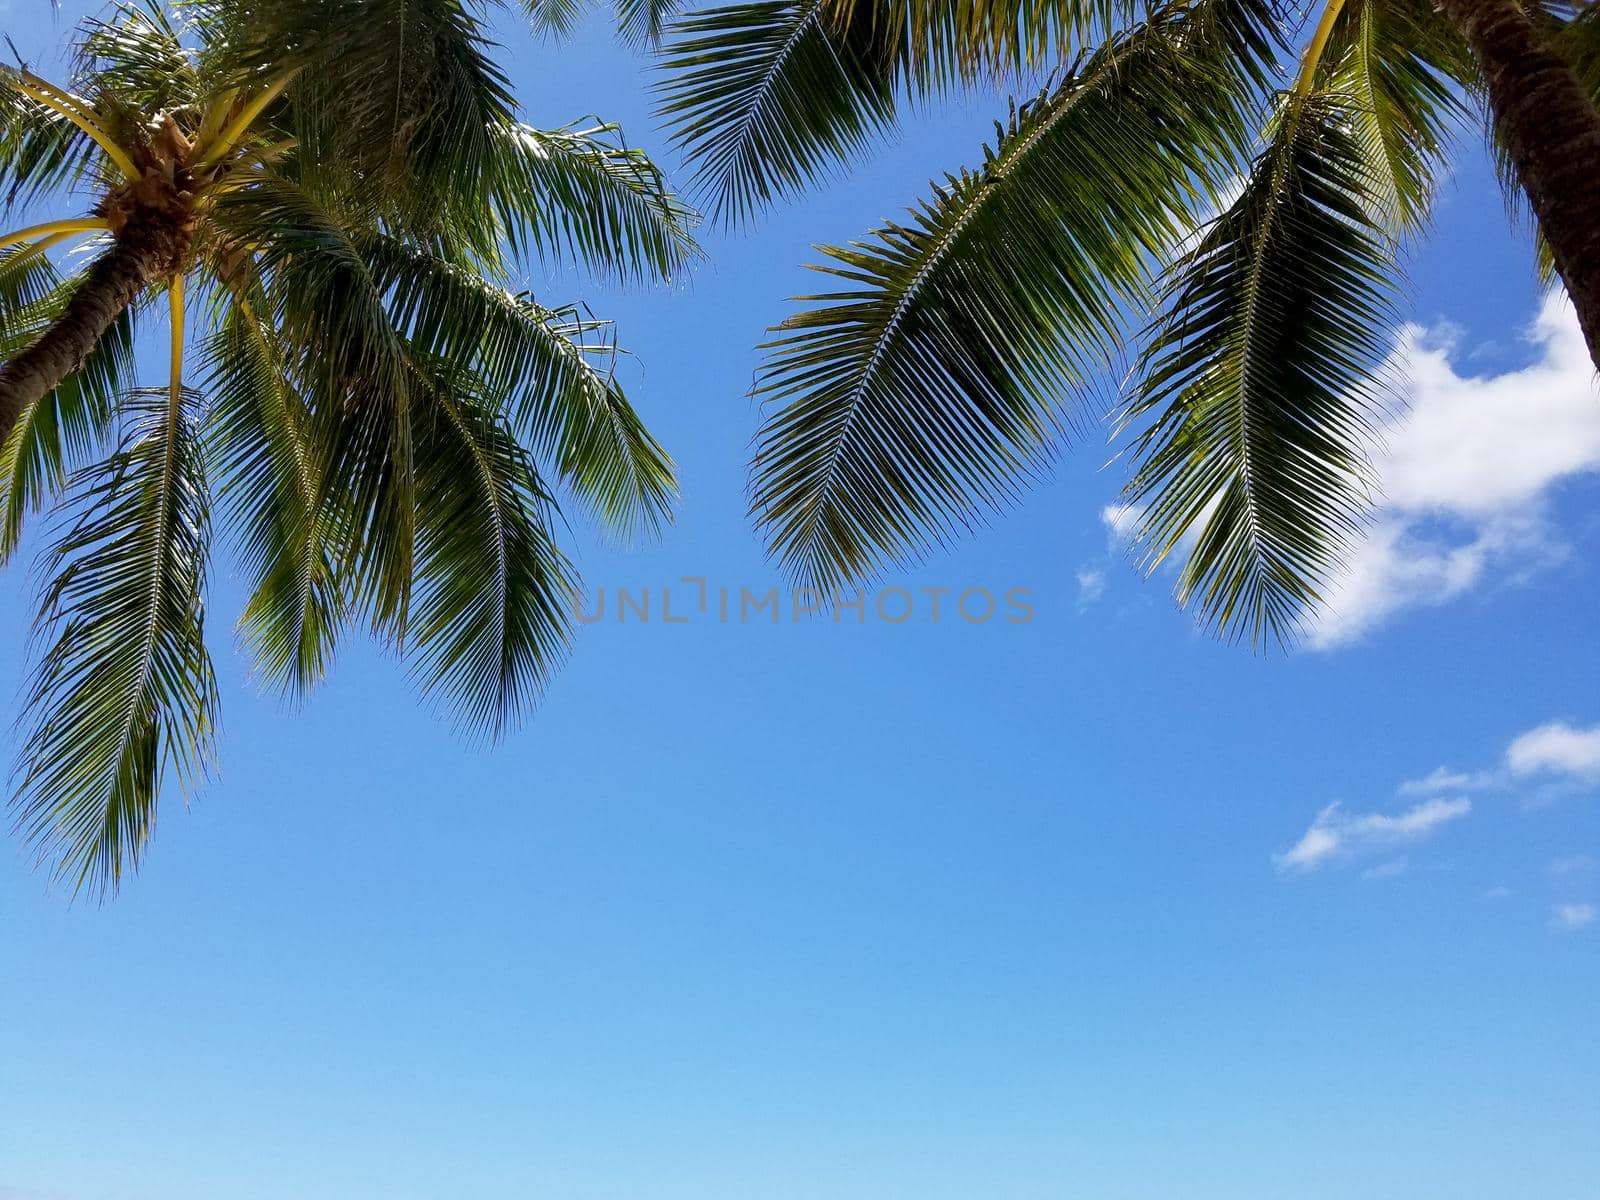 Coconut Tree Palms and Blue Sky by EricGBVD